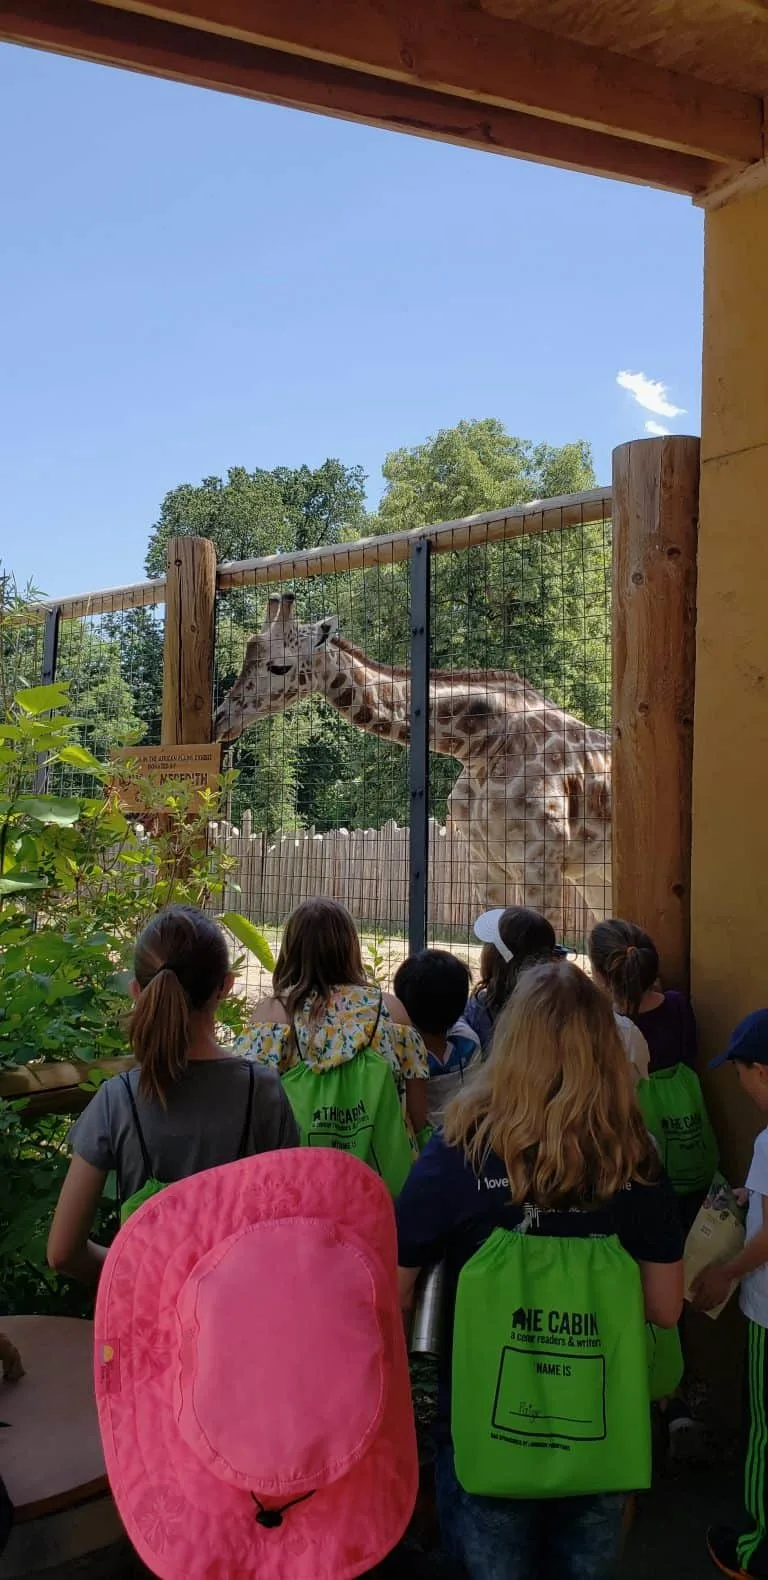 Zoo Boise - one of the fun things to do in Idaho